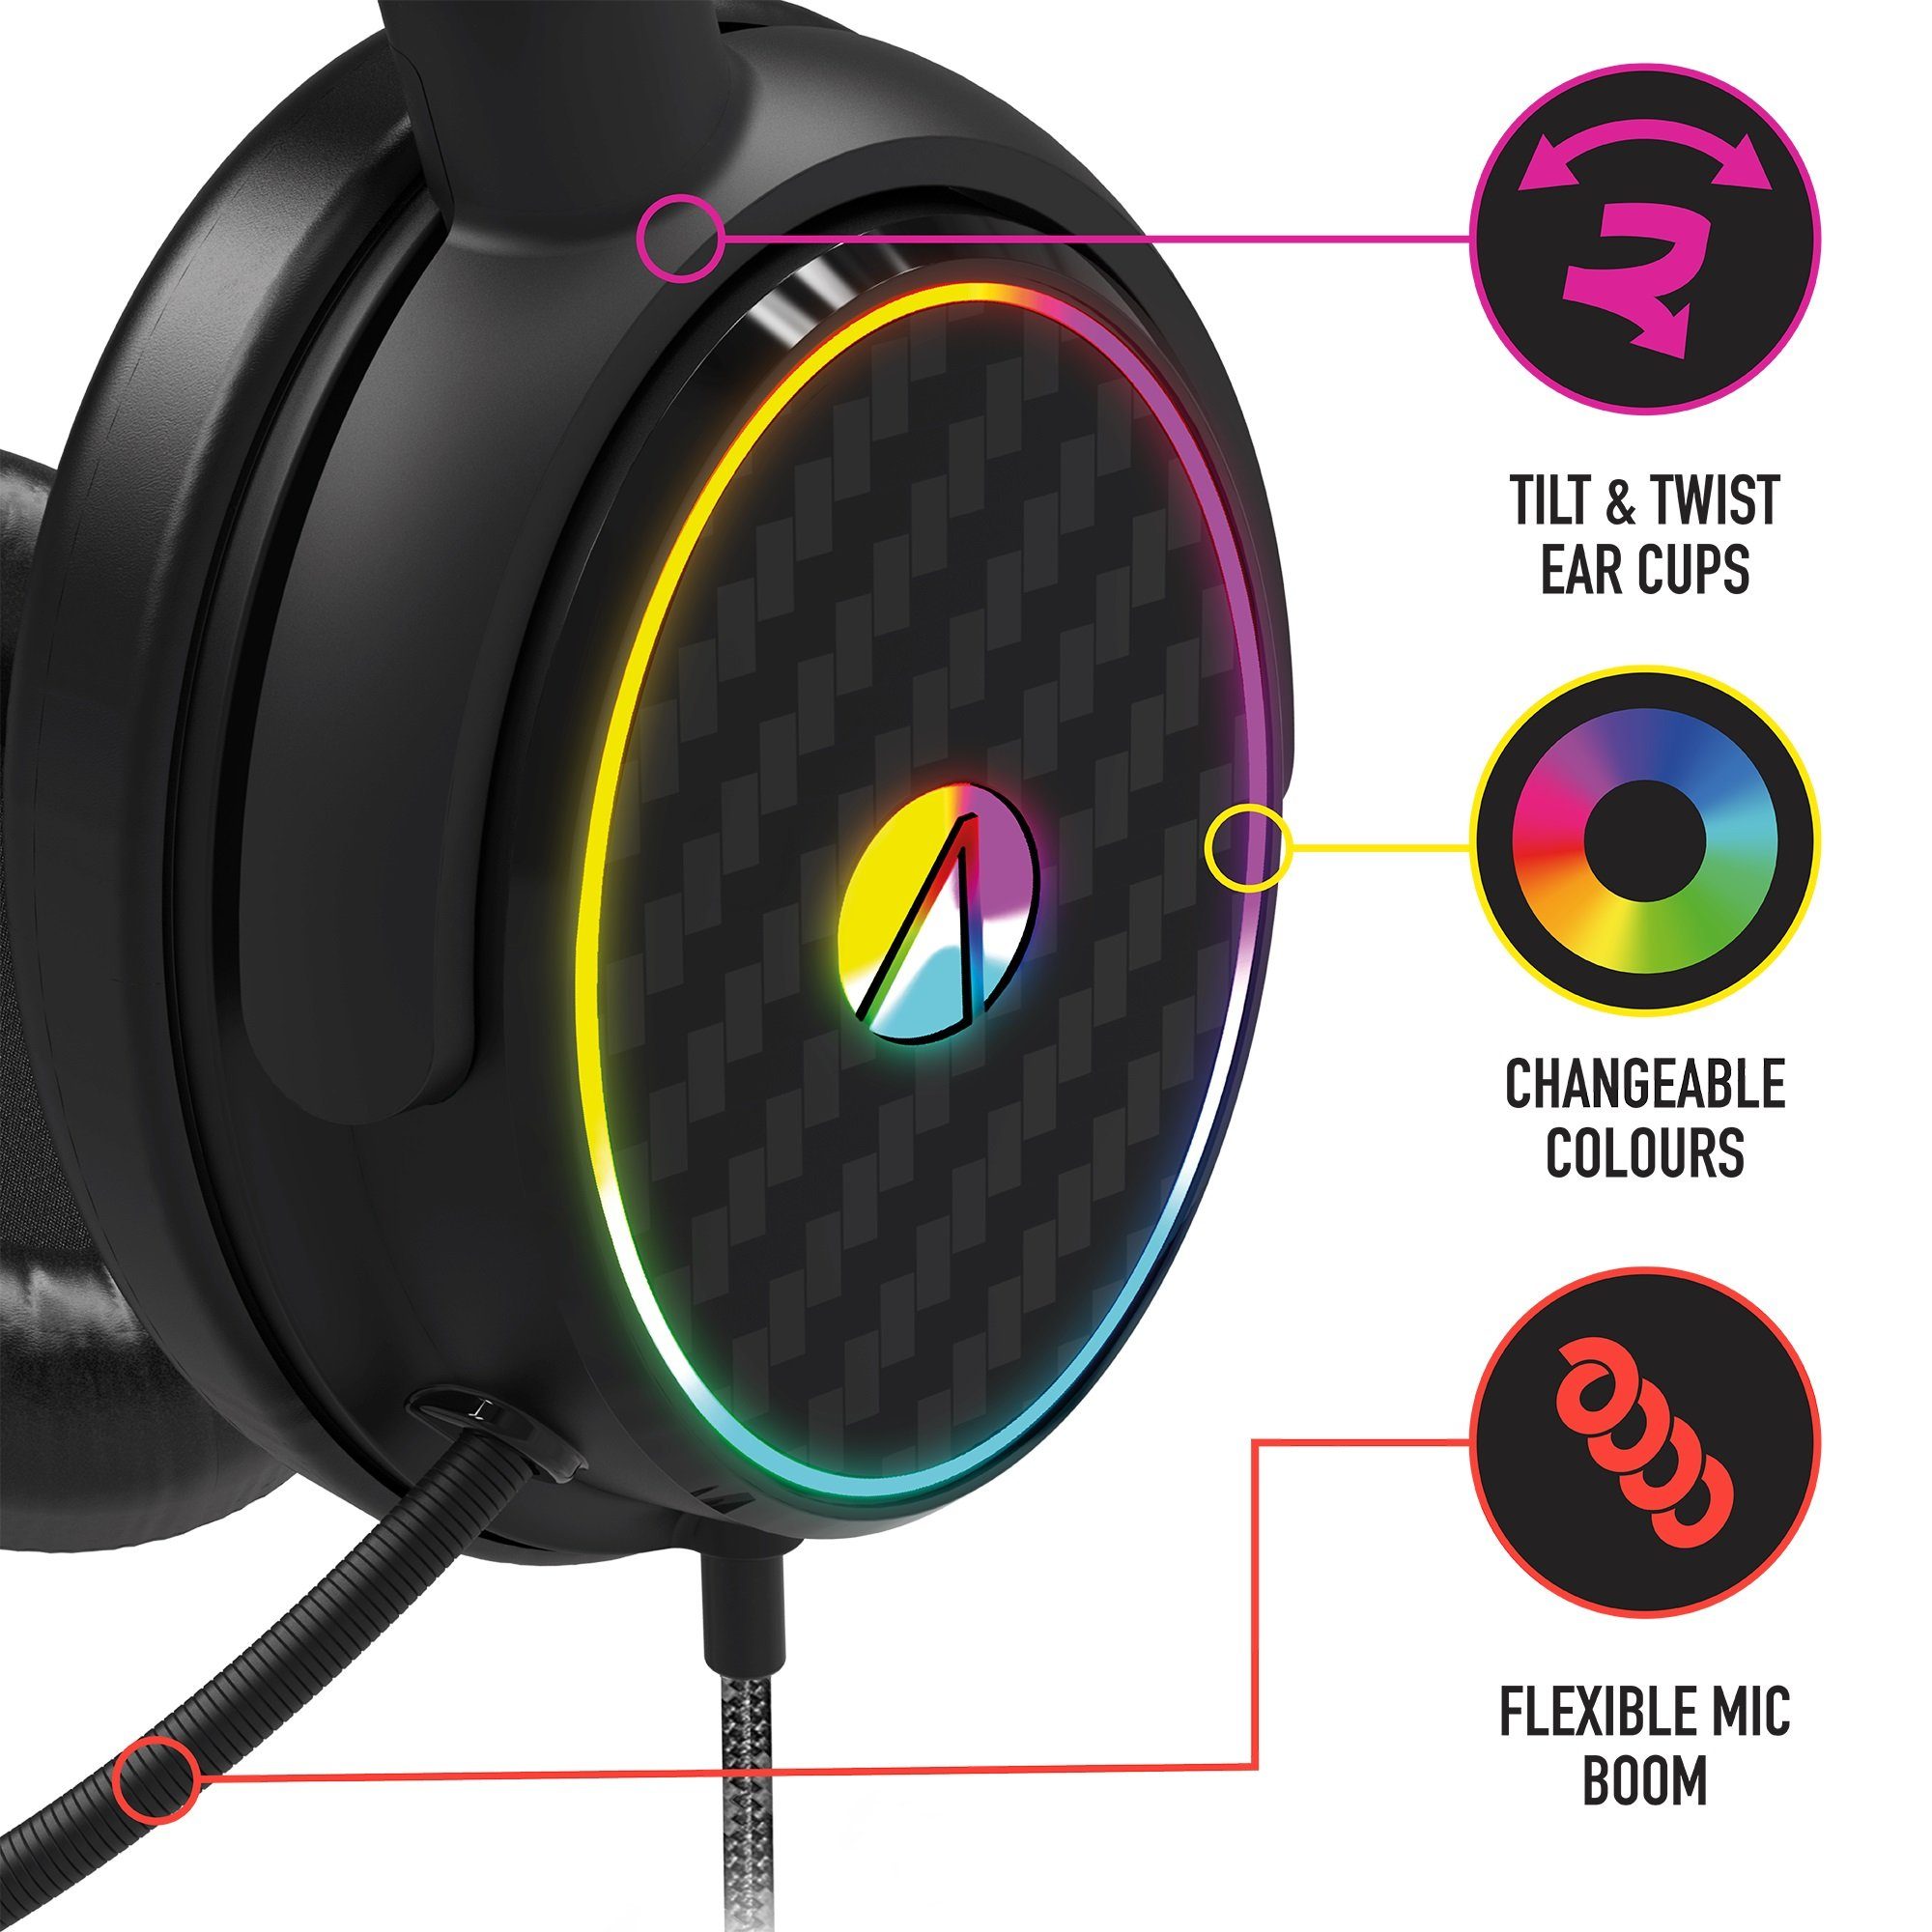 Gaming Headset (Plastikfreie Beleuchtung C6-100 mit Gaming-Headset Verpackung) Stealth Stereo LED